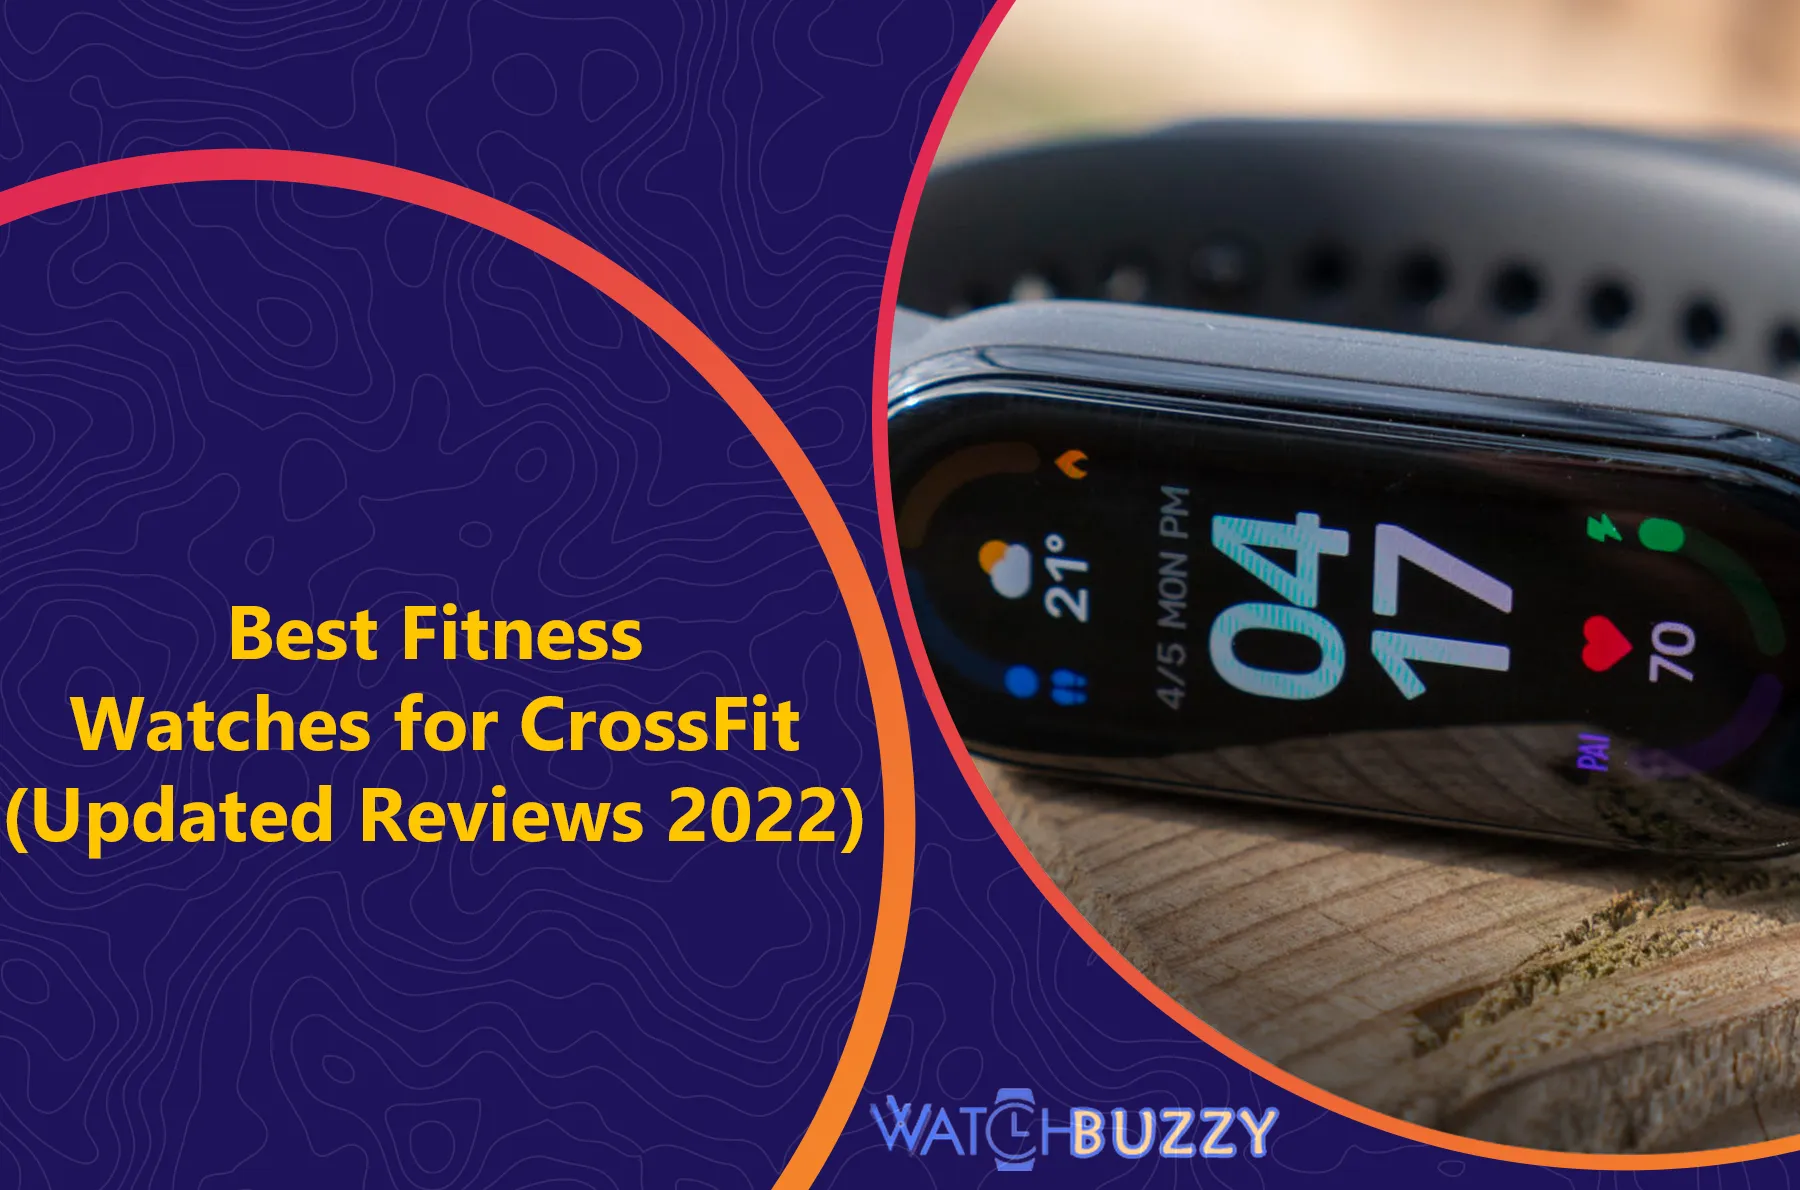 Best Fitness Watches for CrossFit (Updated Reviews 2022)